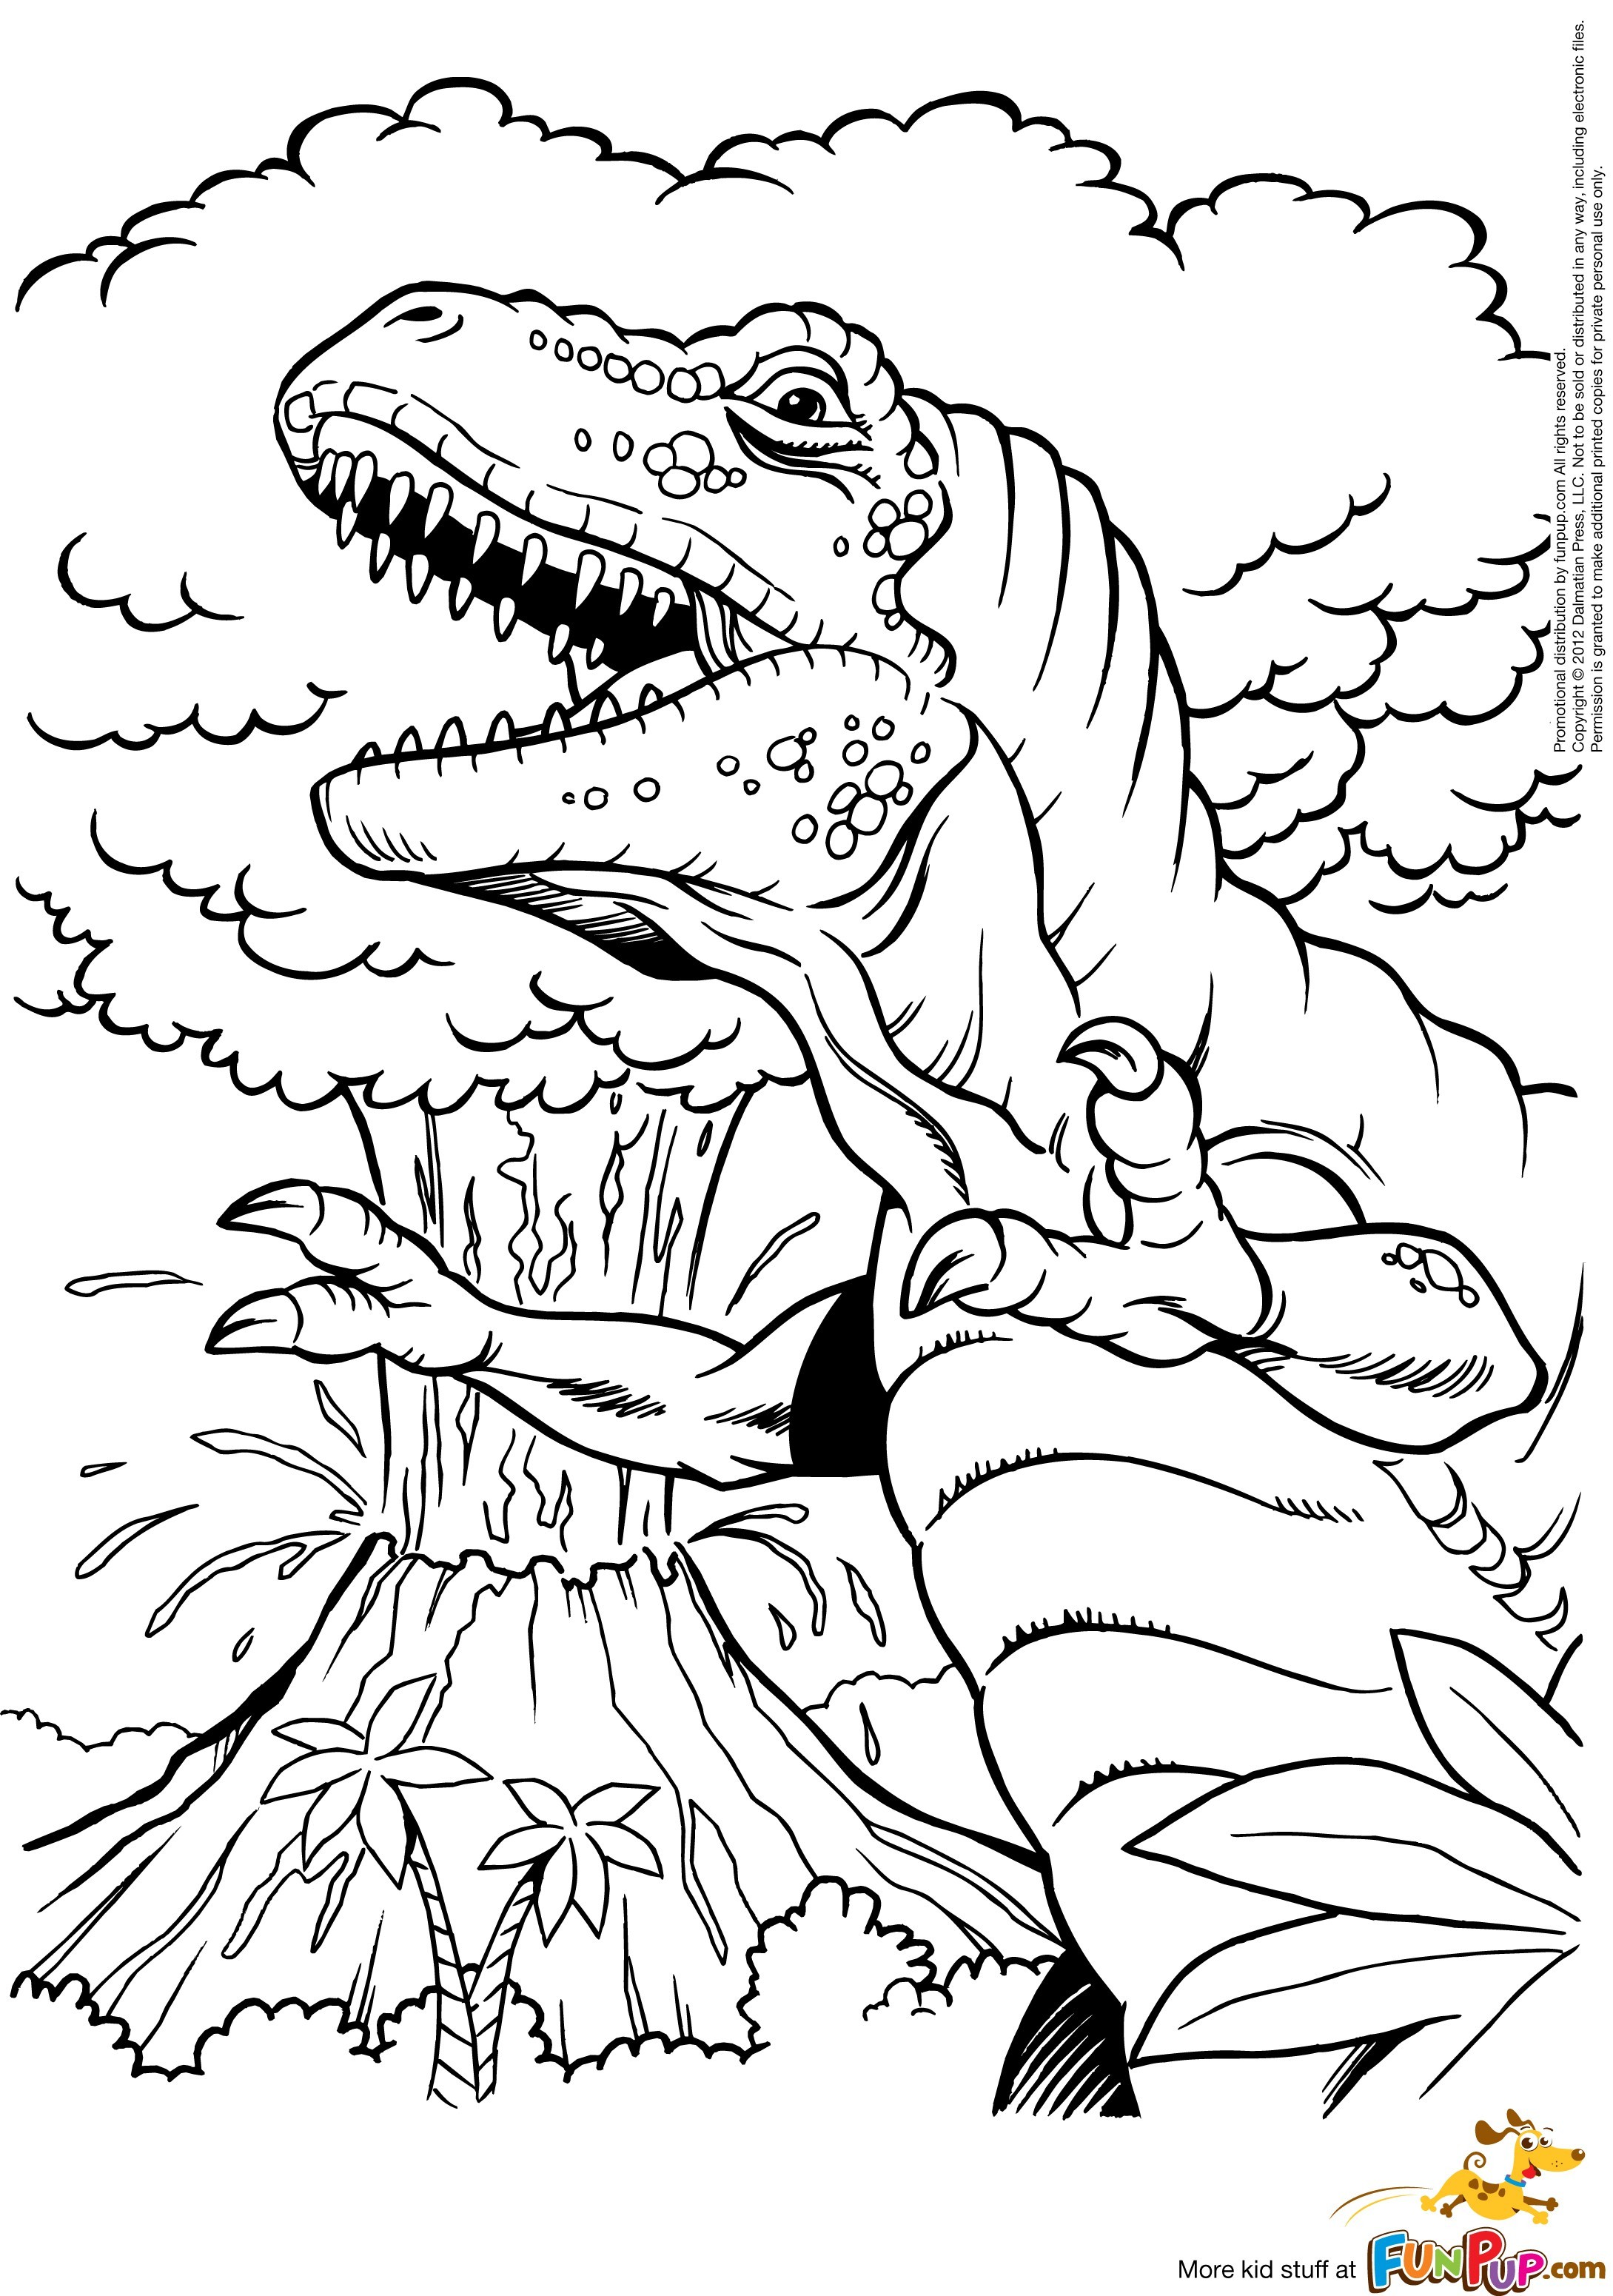 Minecraft Dinosaurs Coloring Pages Wallpaper